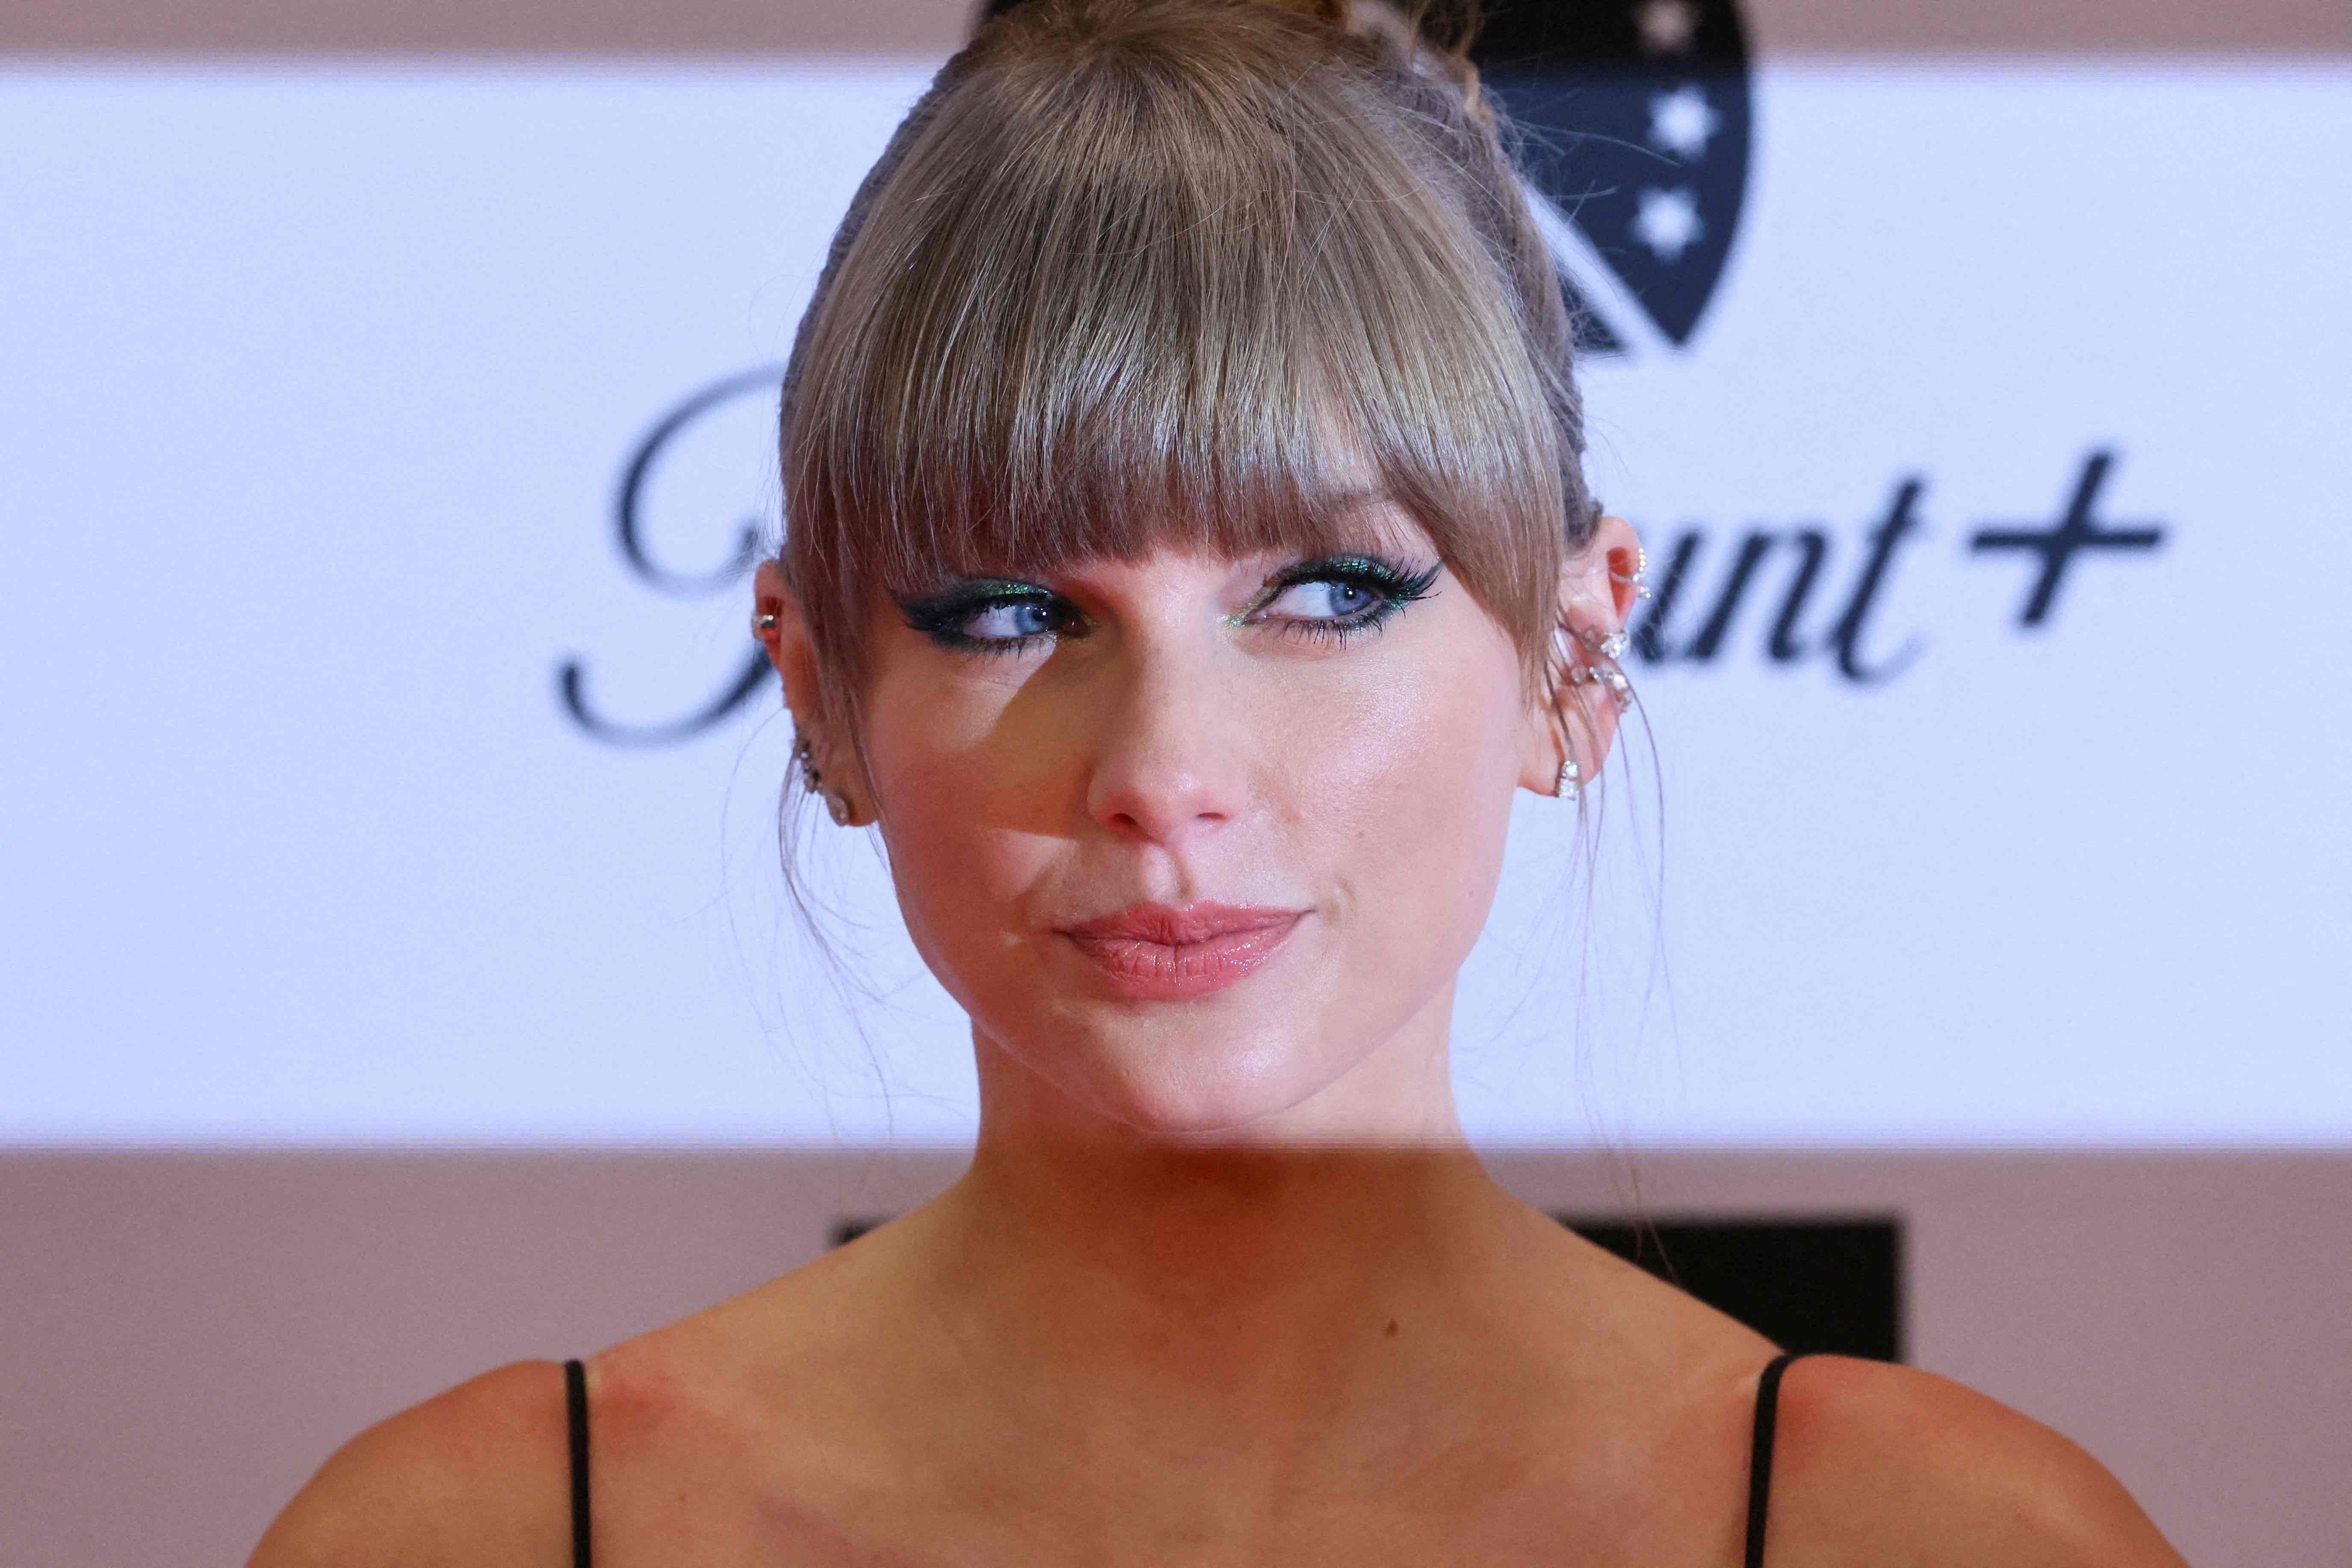 Must be exhausting: How Taylor Swift became a target for misinformation 